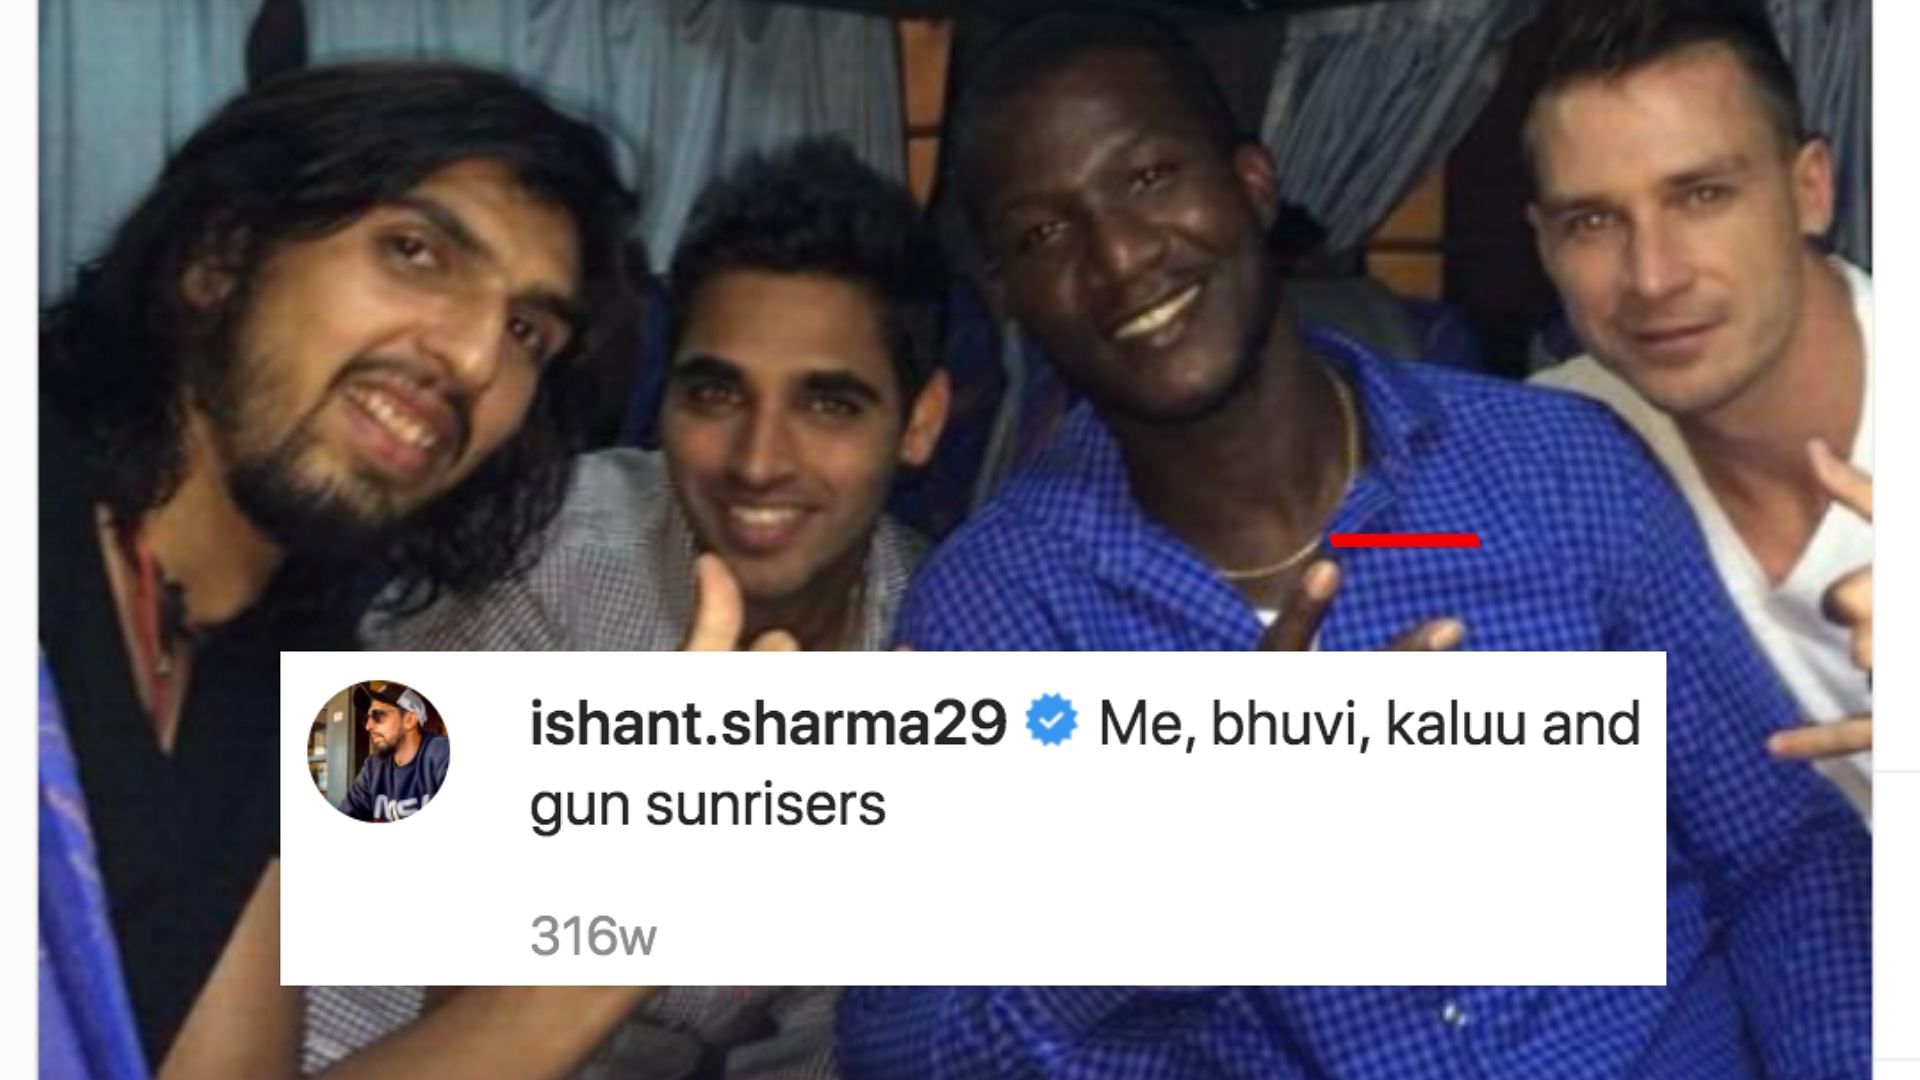 BCCI needs to step up and take action following Daren Sammy’s revelation that he was called ‘kallu’ by his Sunrisers Hyderabad teammates.